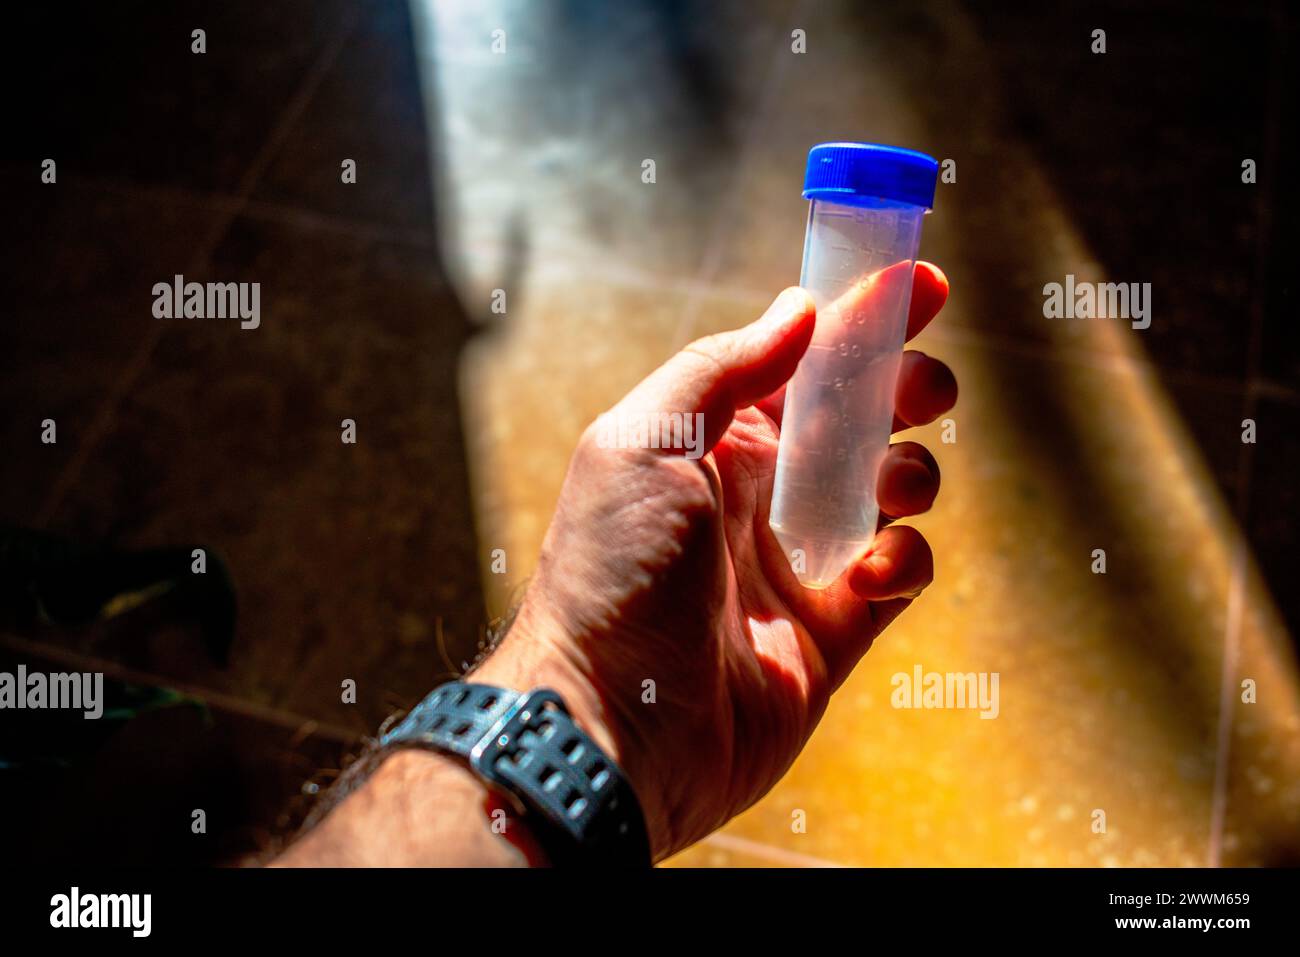 A photo of holding Falcon tube in a sunny lab depicts scientific research and experimentation in a well-lit laboratory setting. Stock Photo